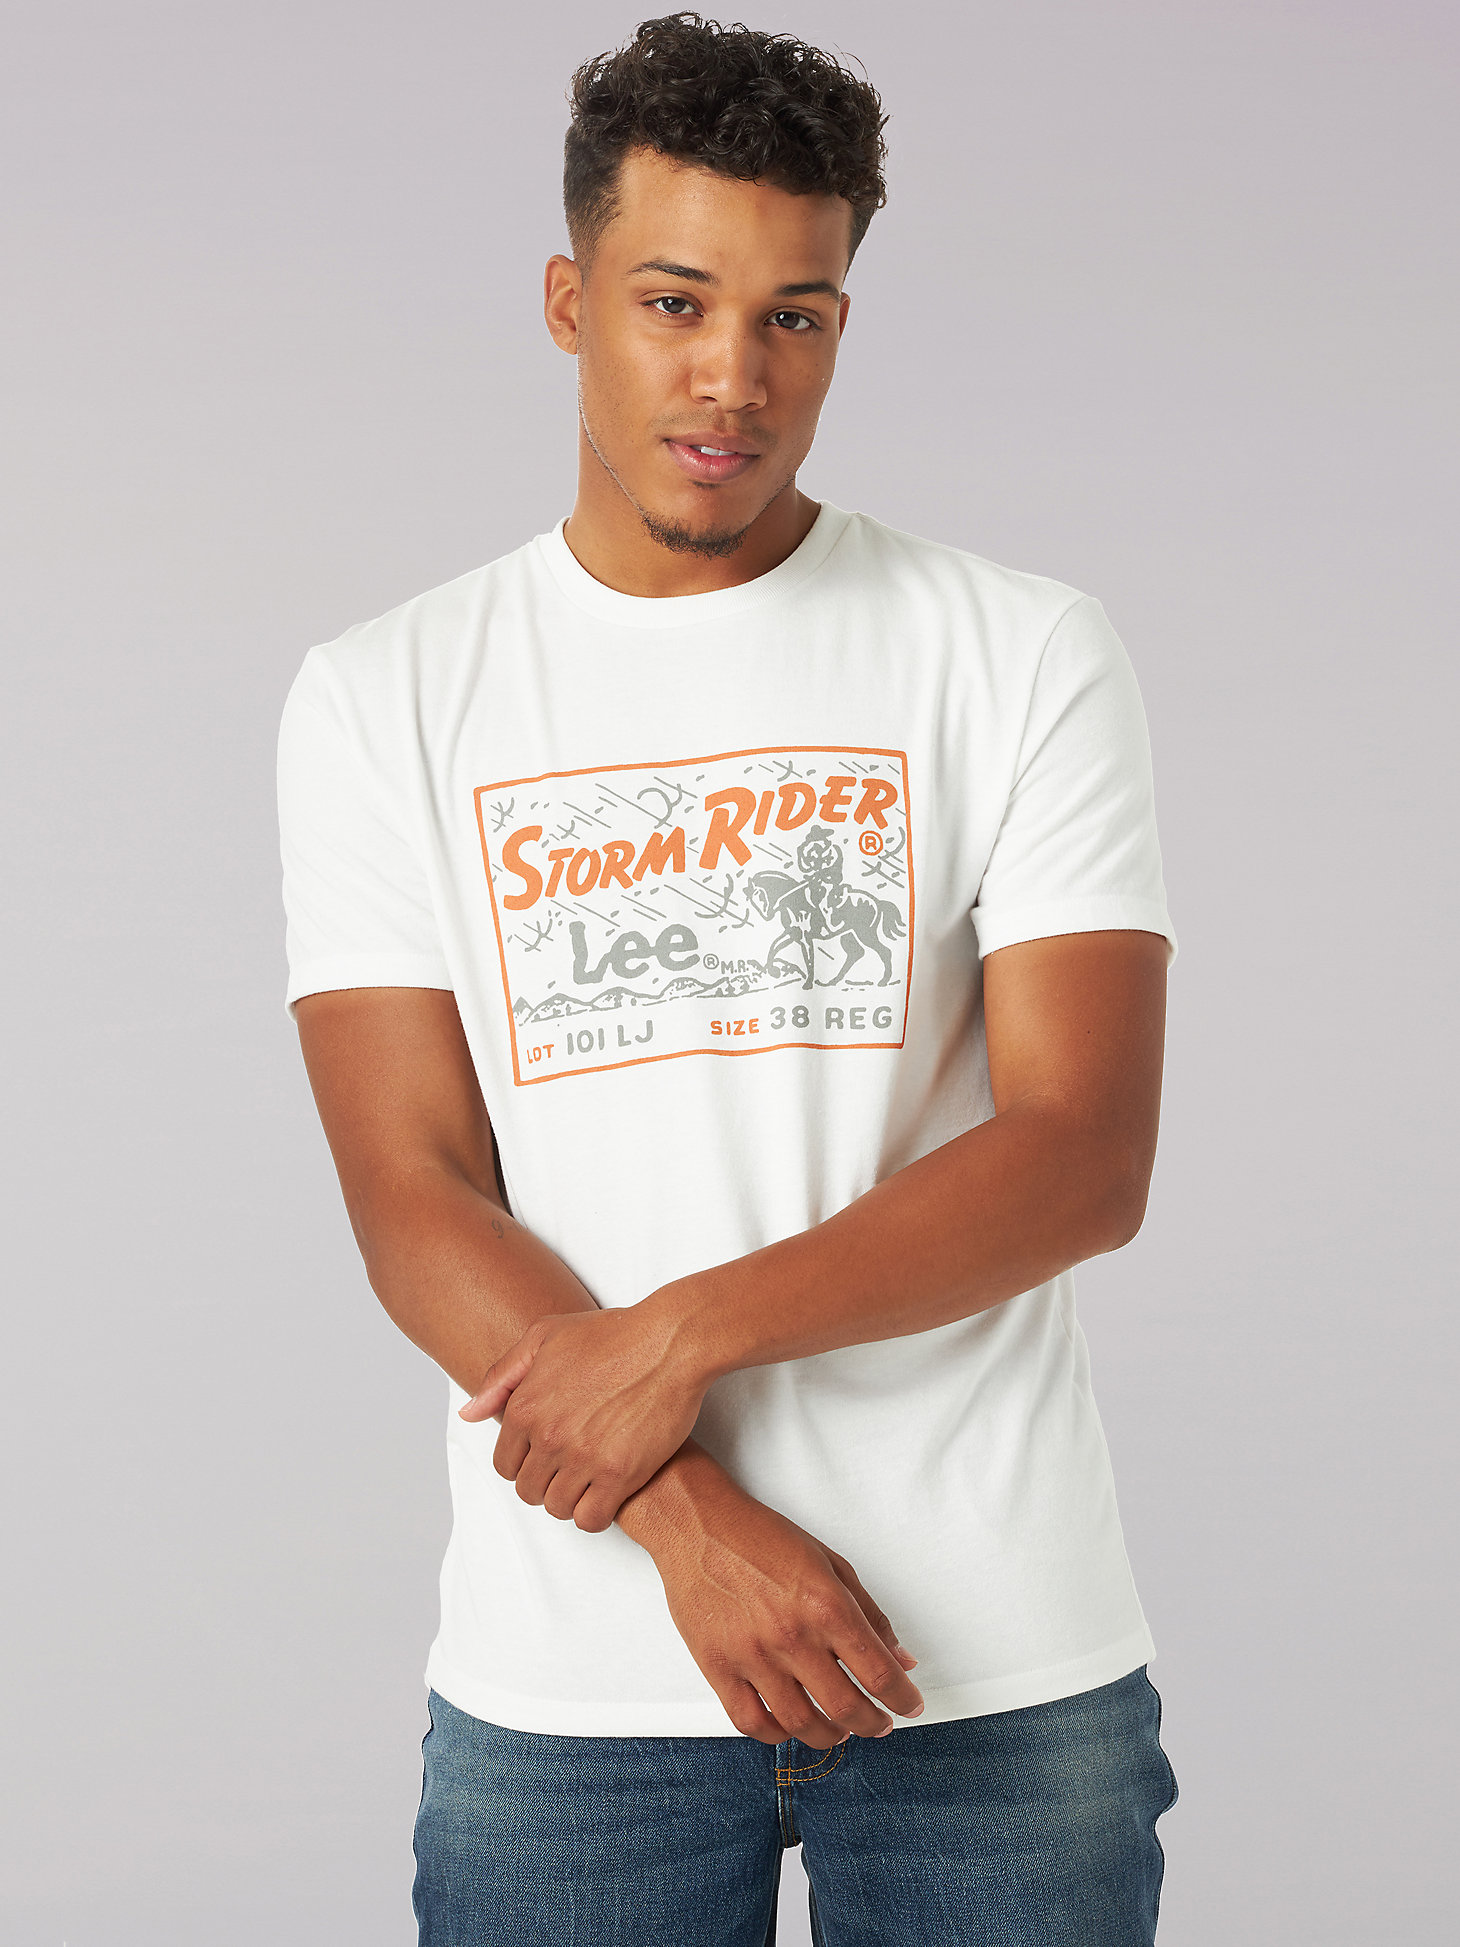 Men's Heritage Storm Rider Graphic Tee in Solid White alternative view 4